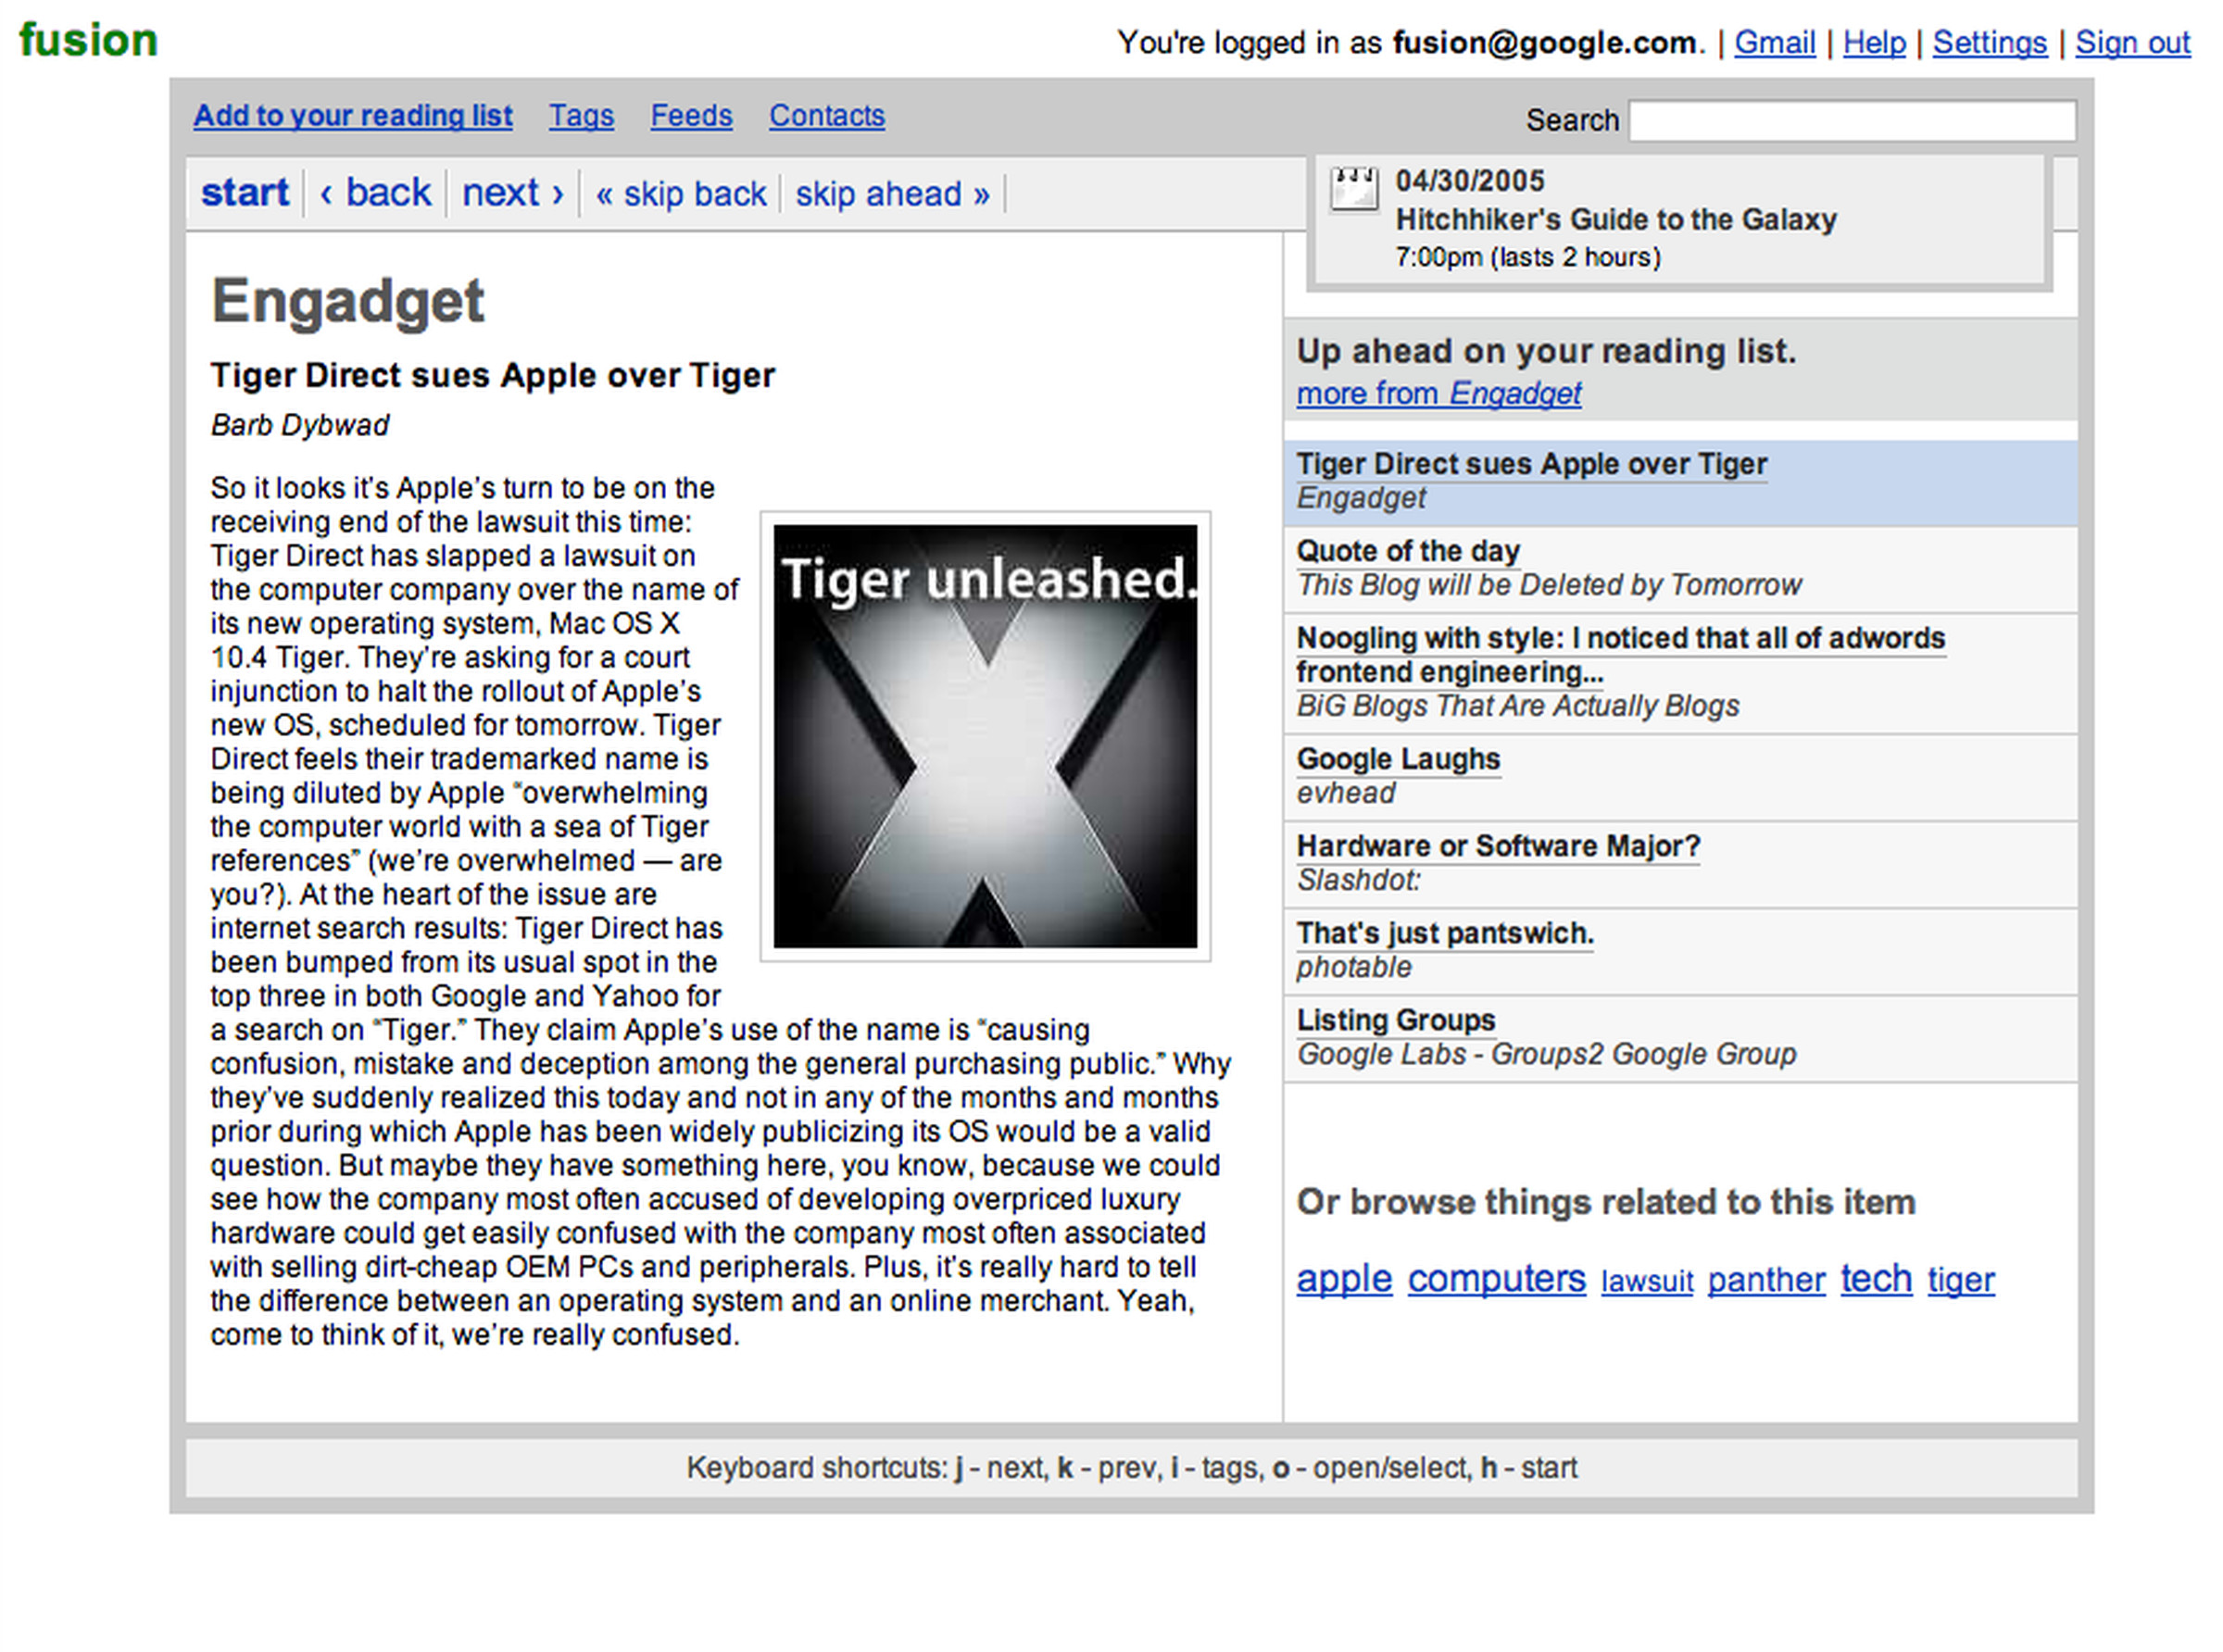 A screenshot of Fusion, an early prototype of the app that became Google Reader.